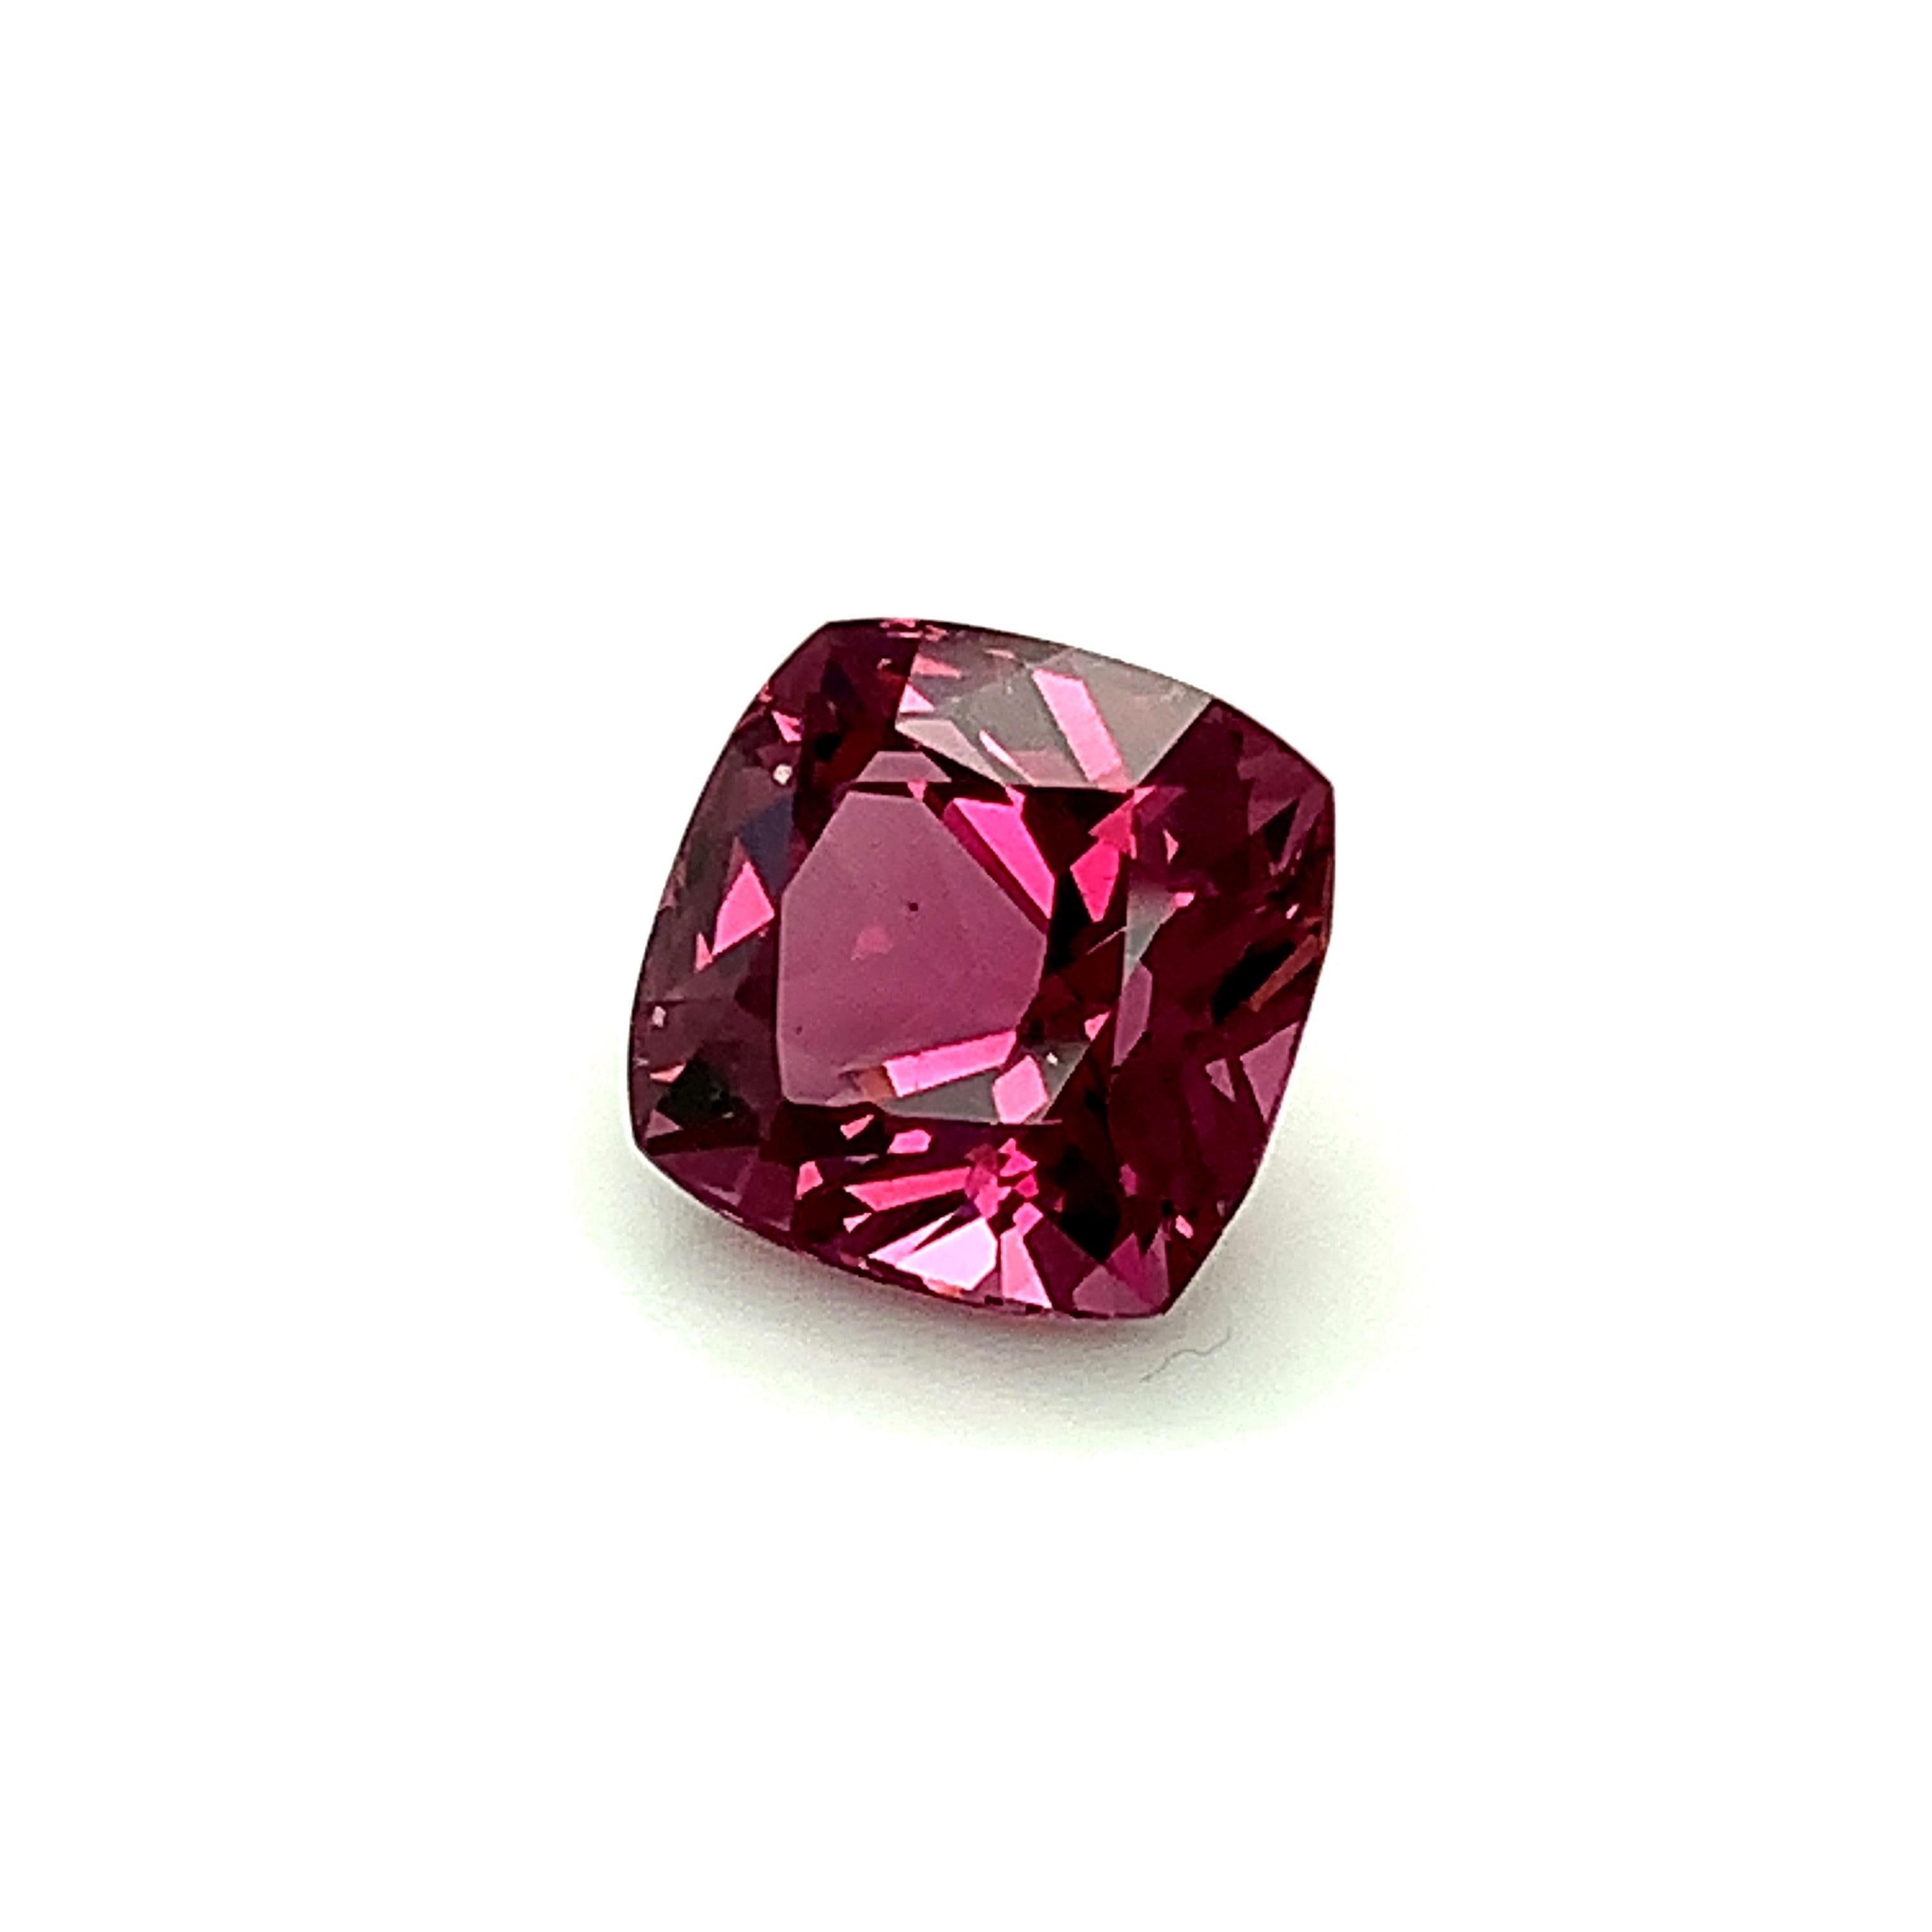 Unheated 9.26 Carat Purple Pink Spinel Cushion, Loose Gemstone, GIA Certified .A For Sale 2